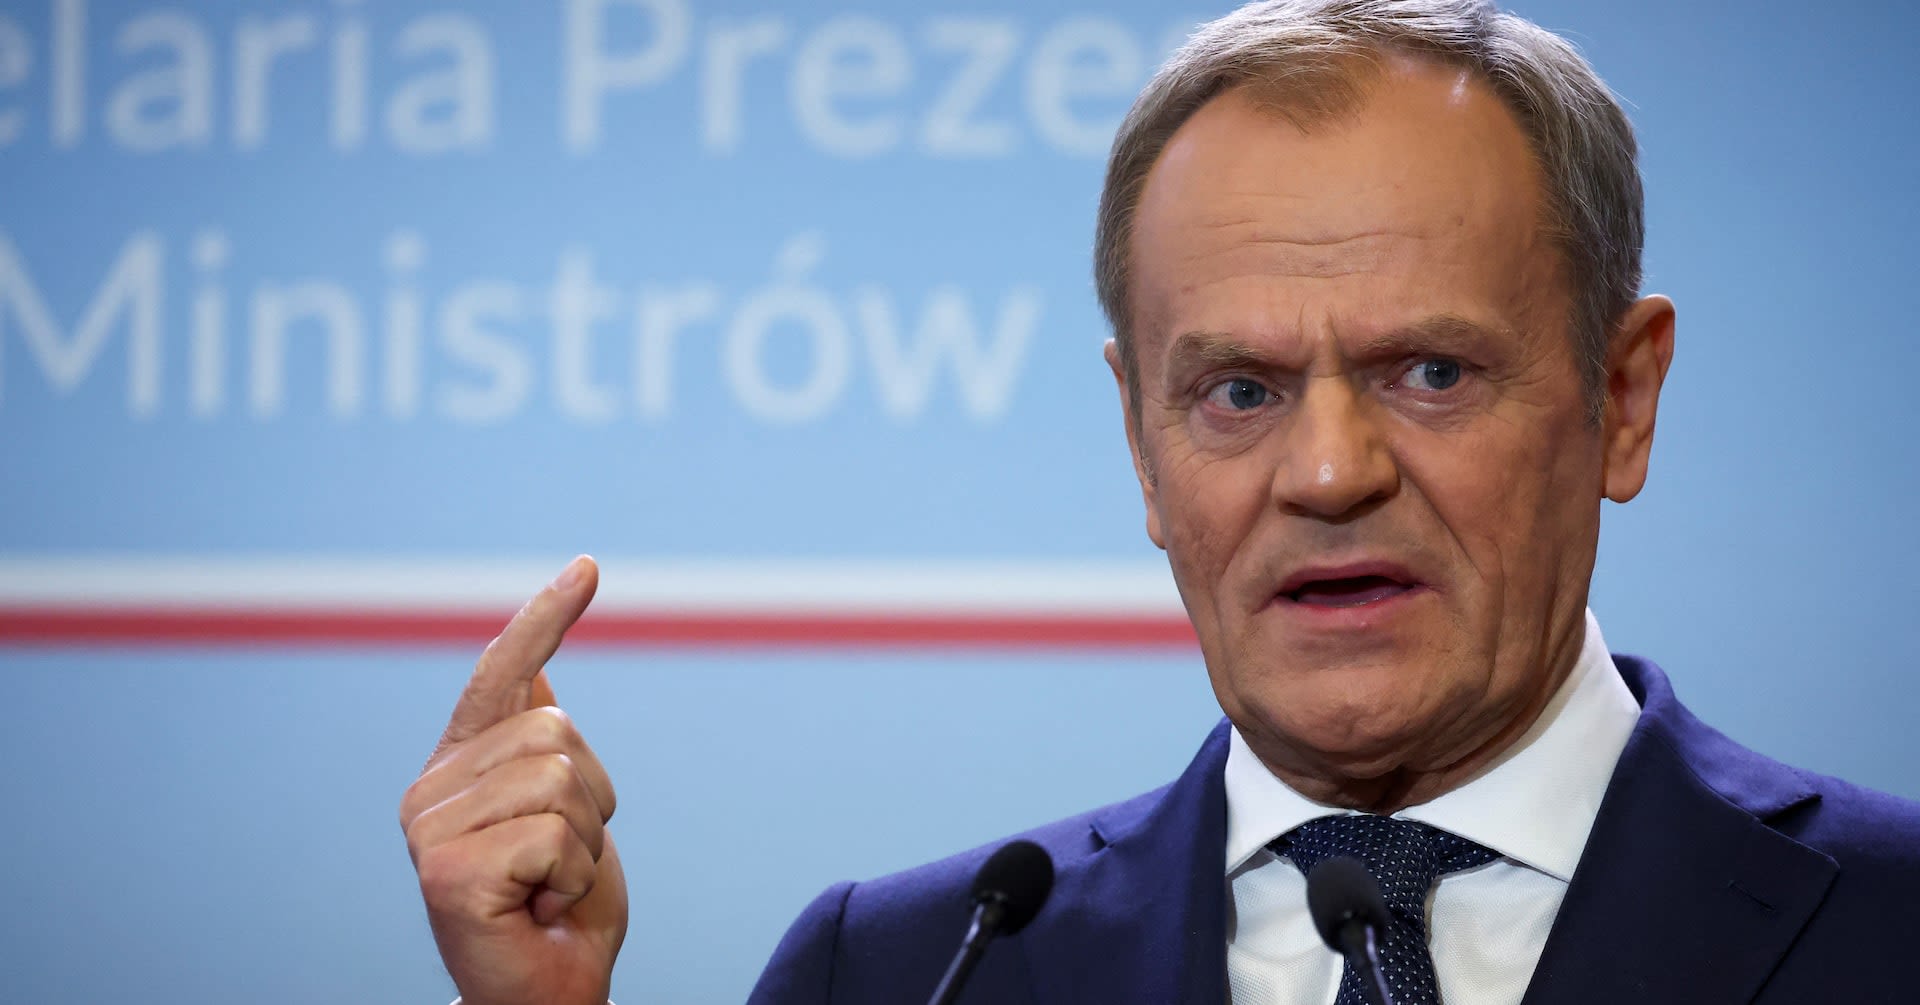 Poland's Tusk calls security meeting to discuss spy threat from Russia and Belarus